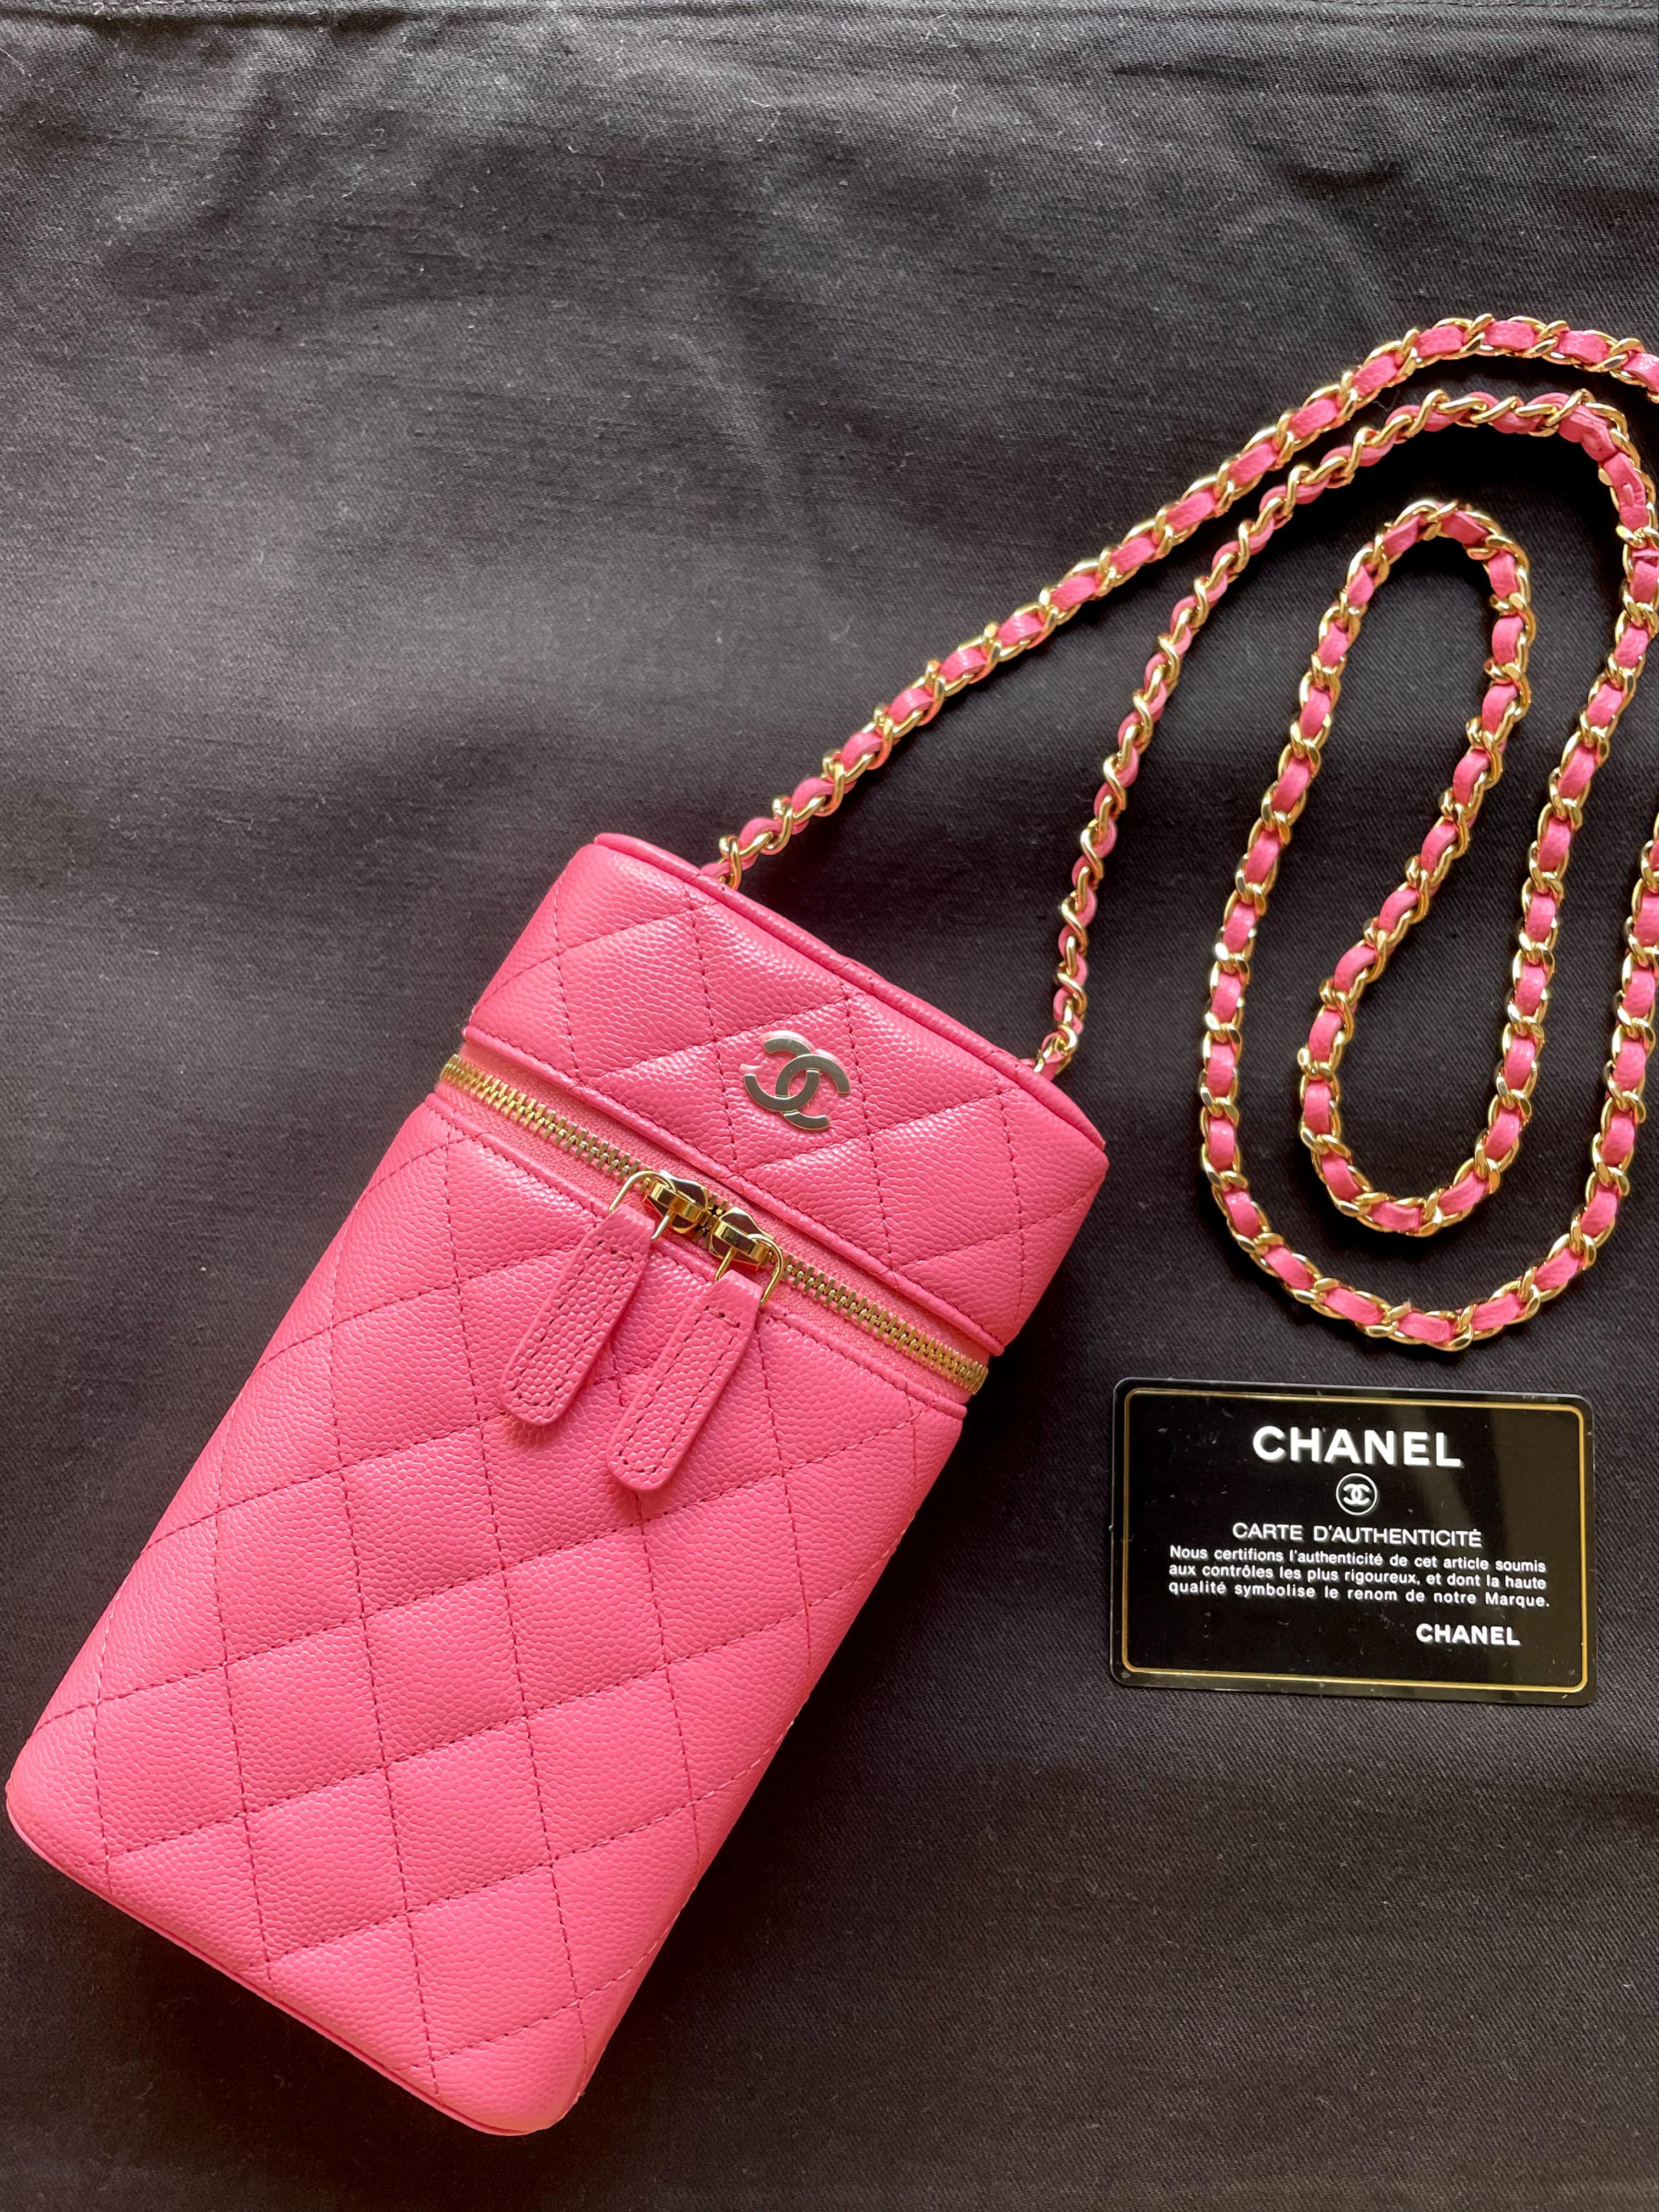 Chanel Caviar Vanity Phone Holder with Chain